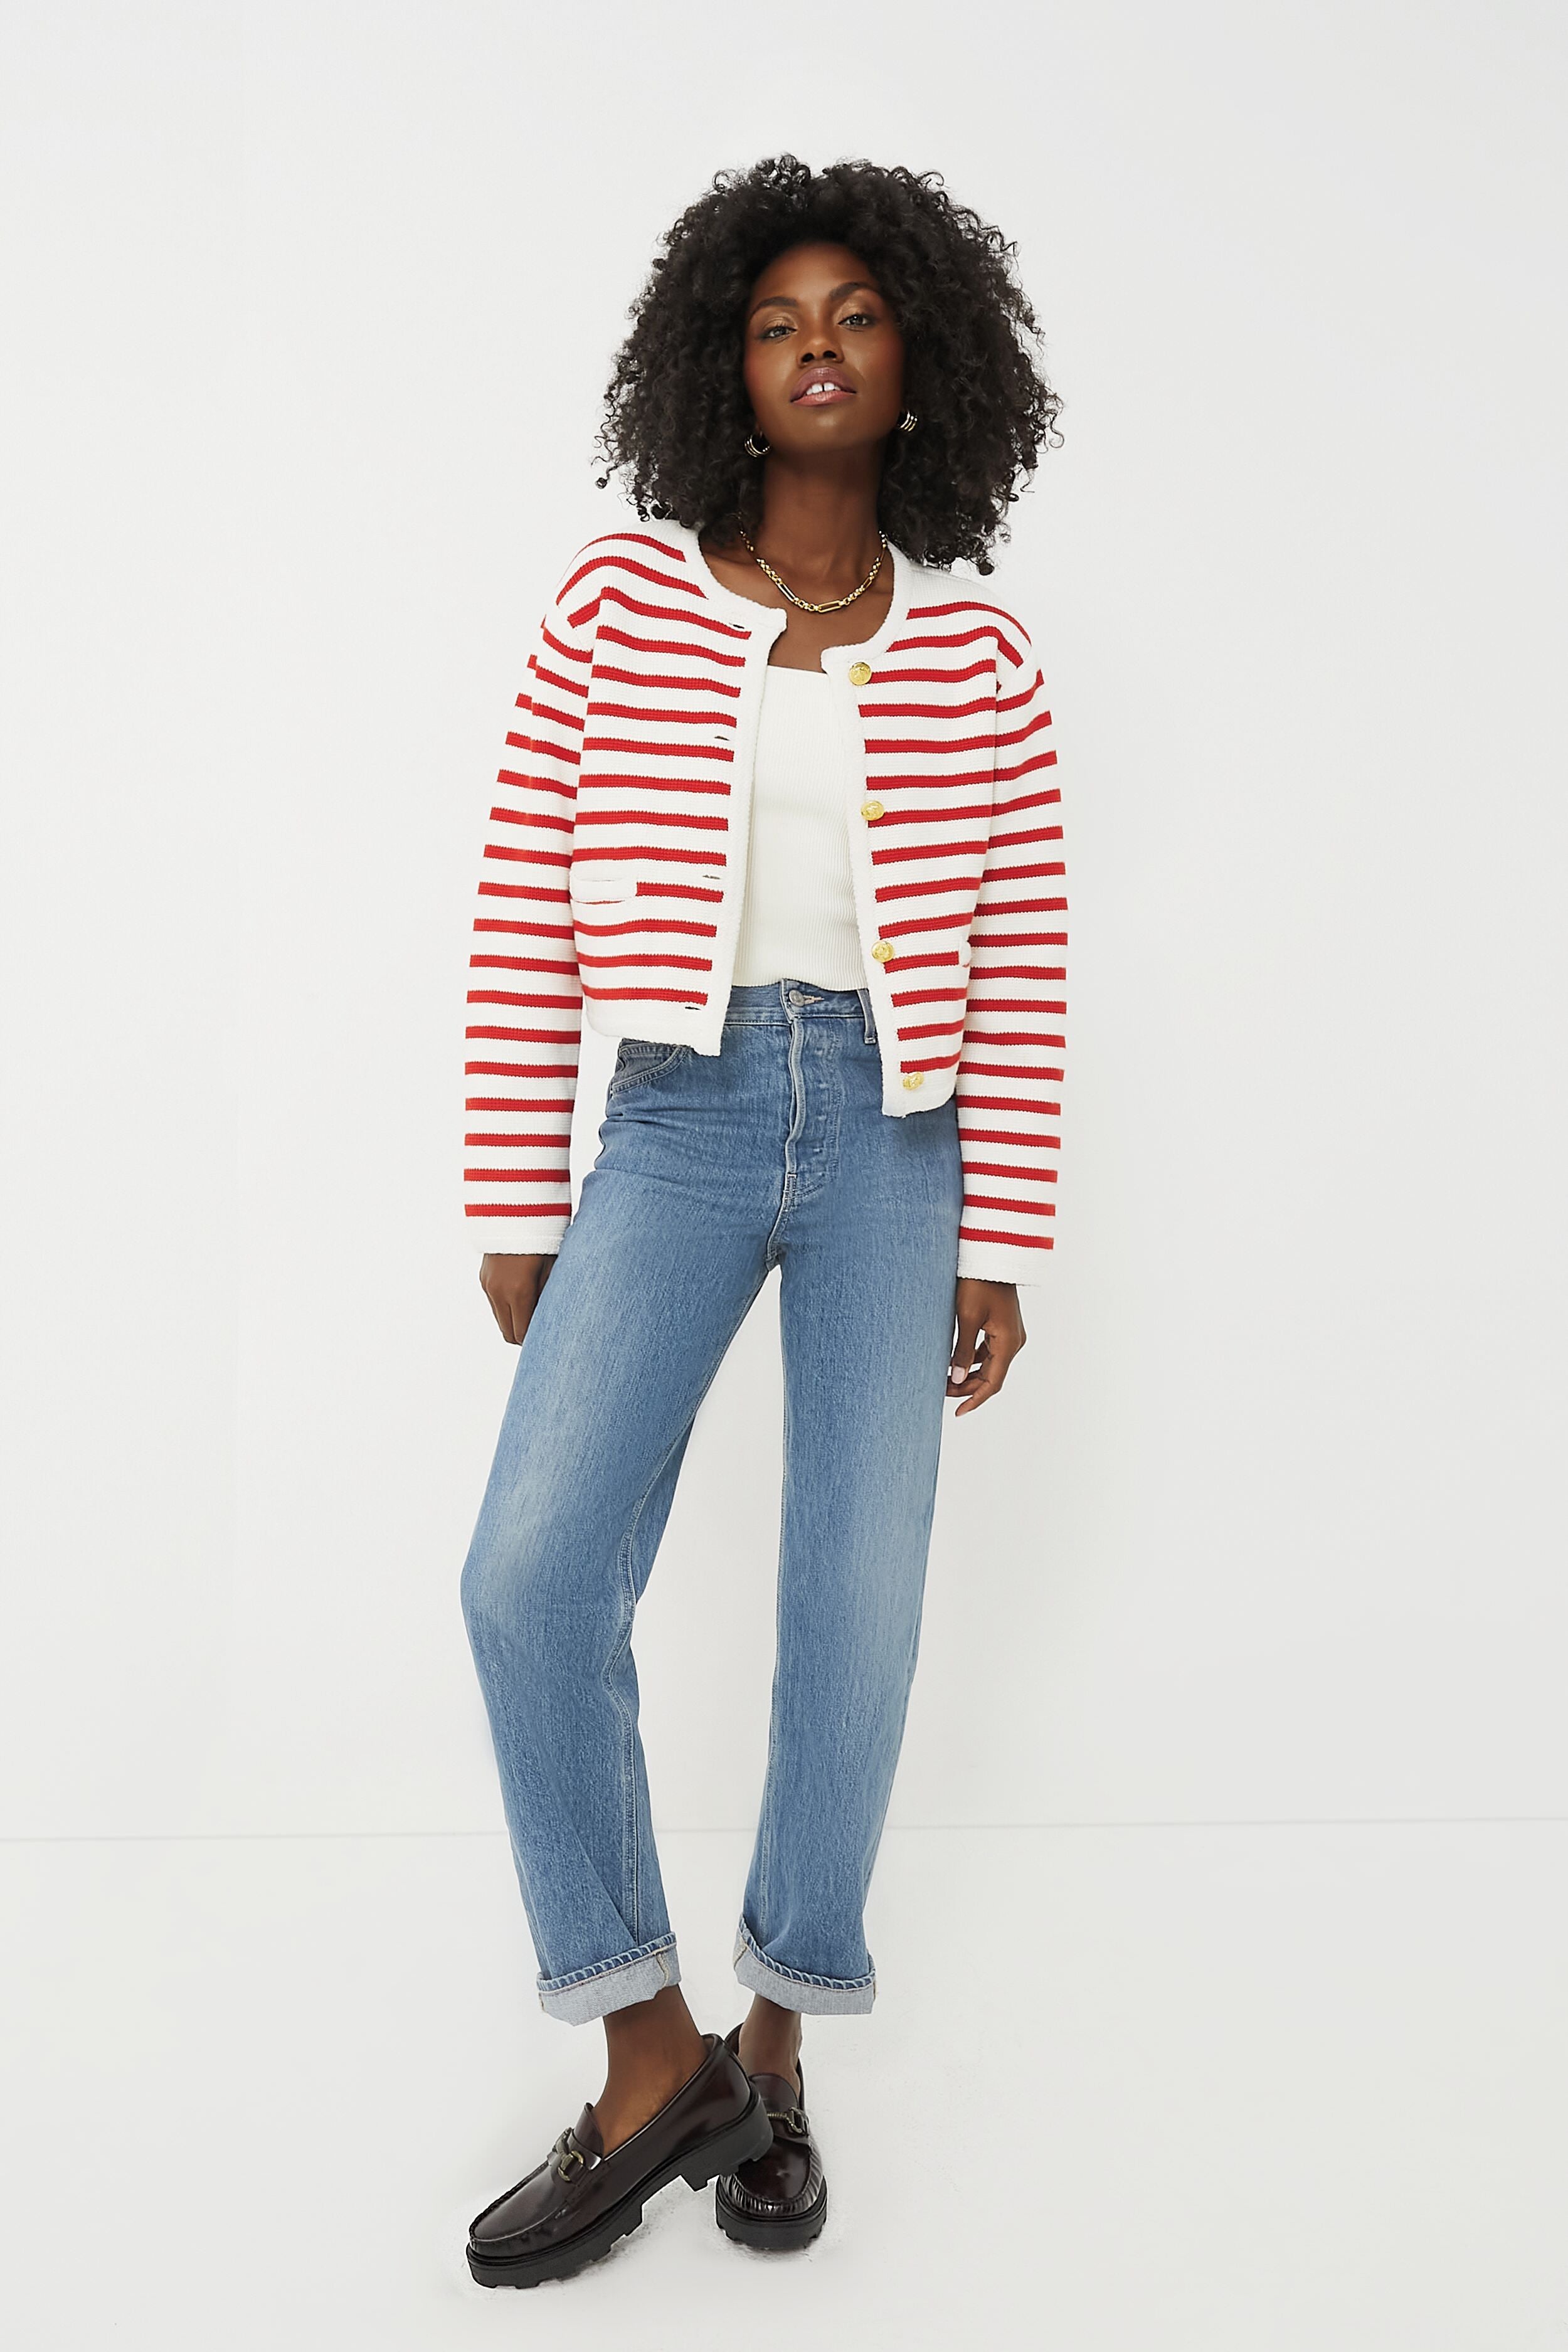 Hoosiers, Indiana Tito Stripe Knit Cropped Cardigan